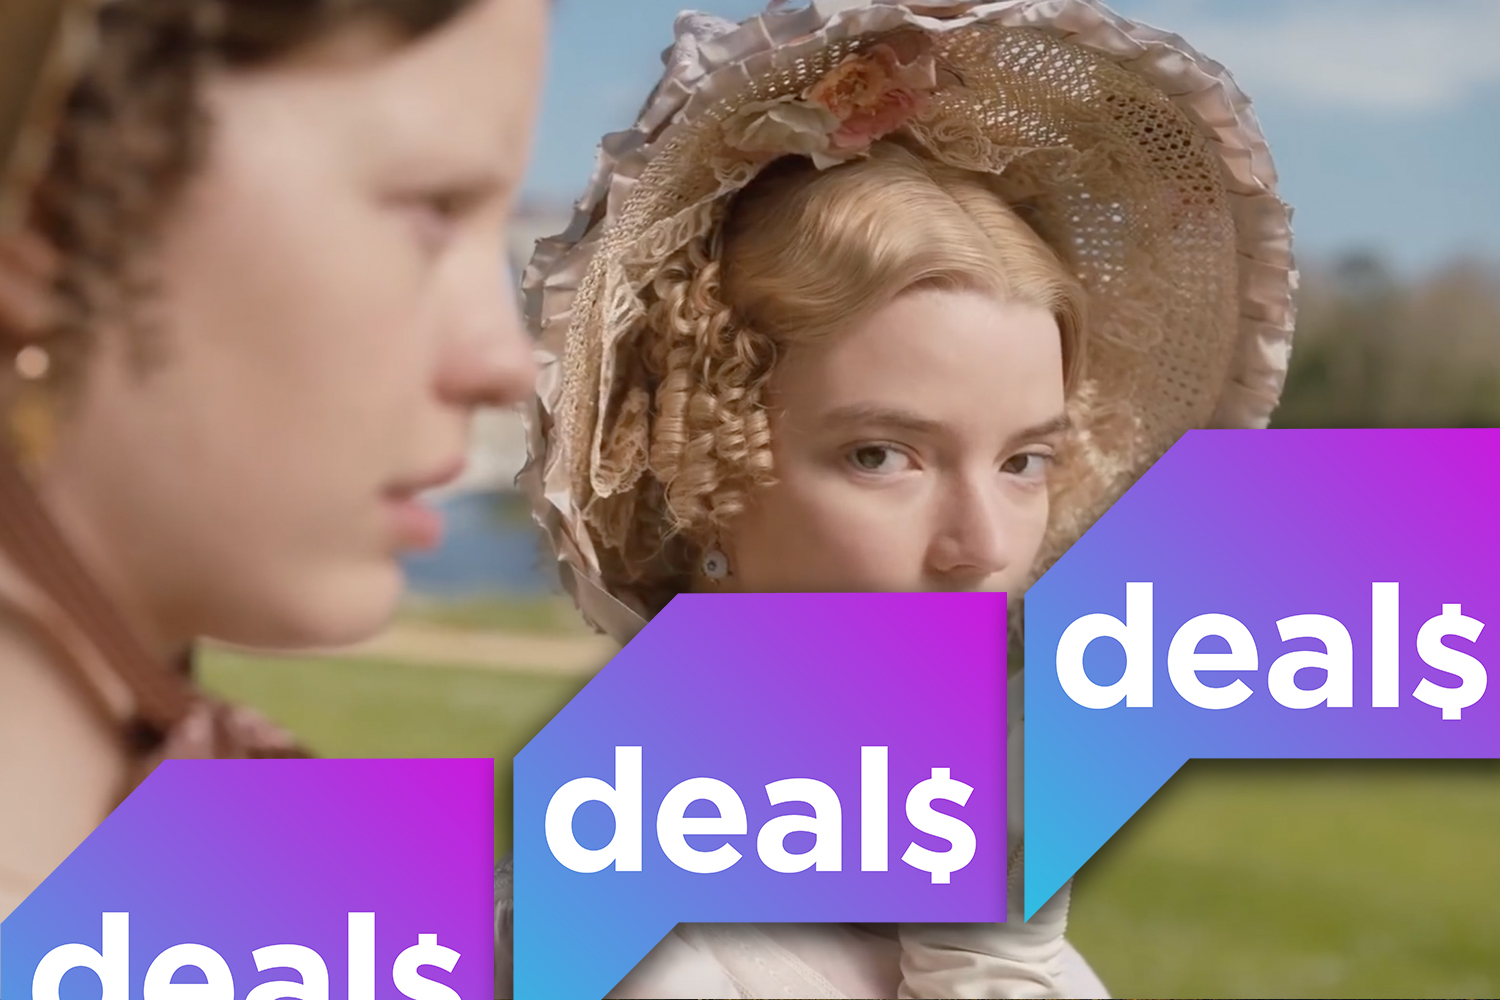 a screenshot from Emma overlaid with the Polygon Deals logo